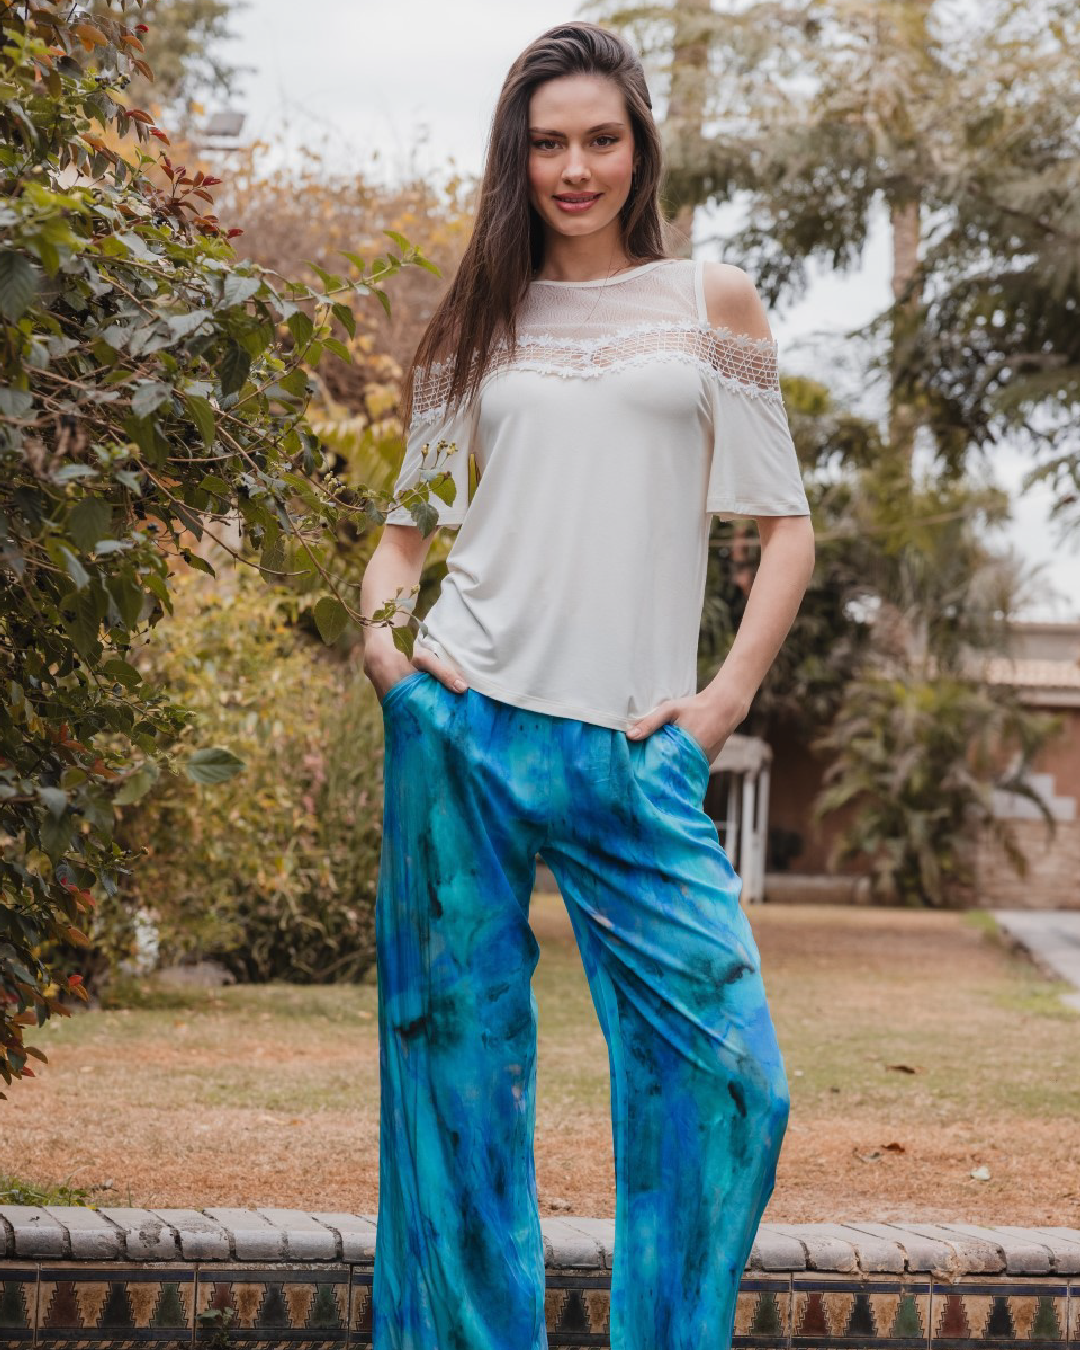 Women's pajamas with half sleeves, lace on the chest, and tie-dye printed pants